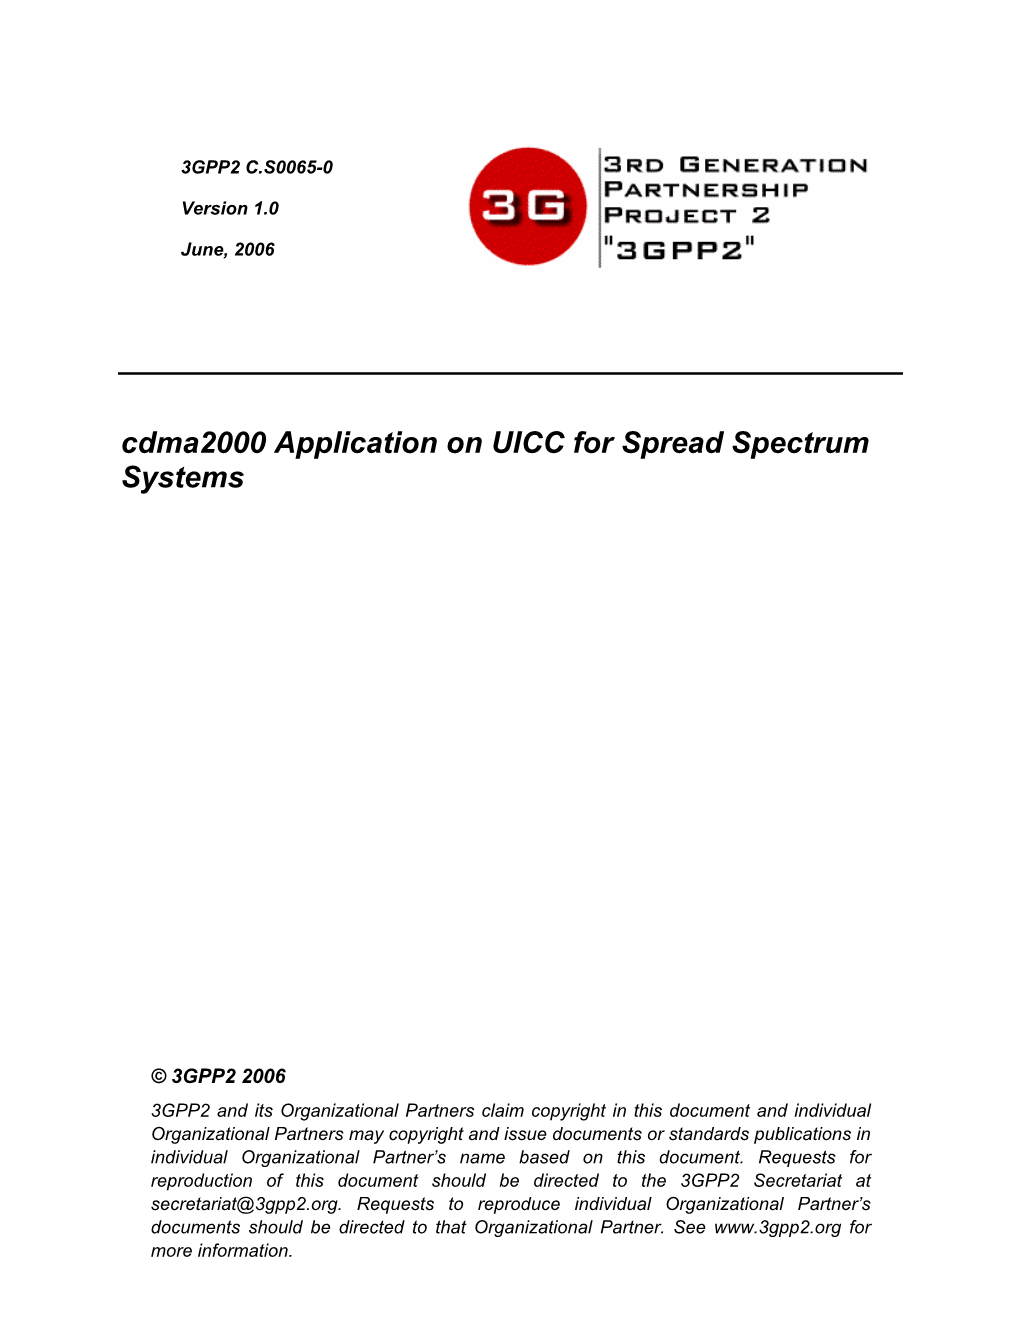 Cdma2000 Application on UICC for Spread Spectrum Systems